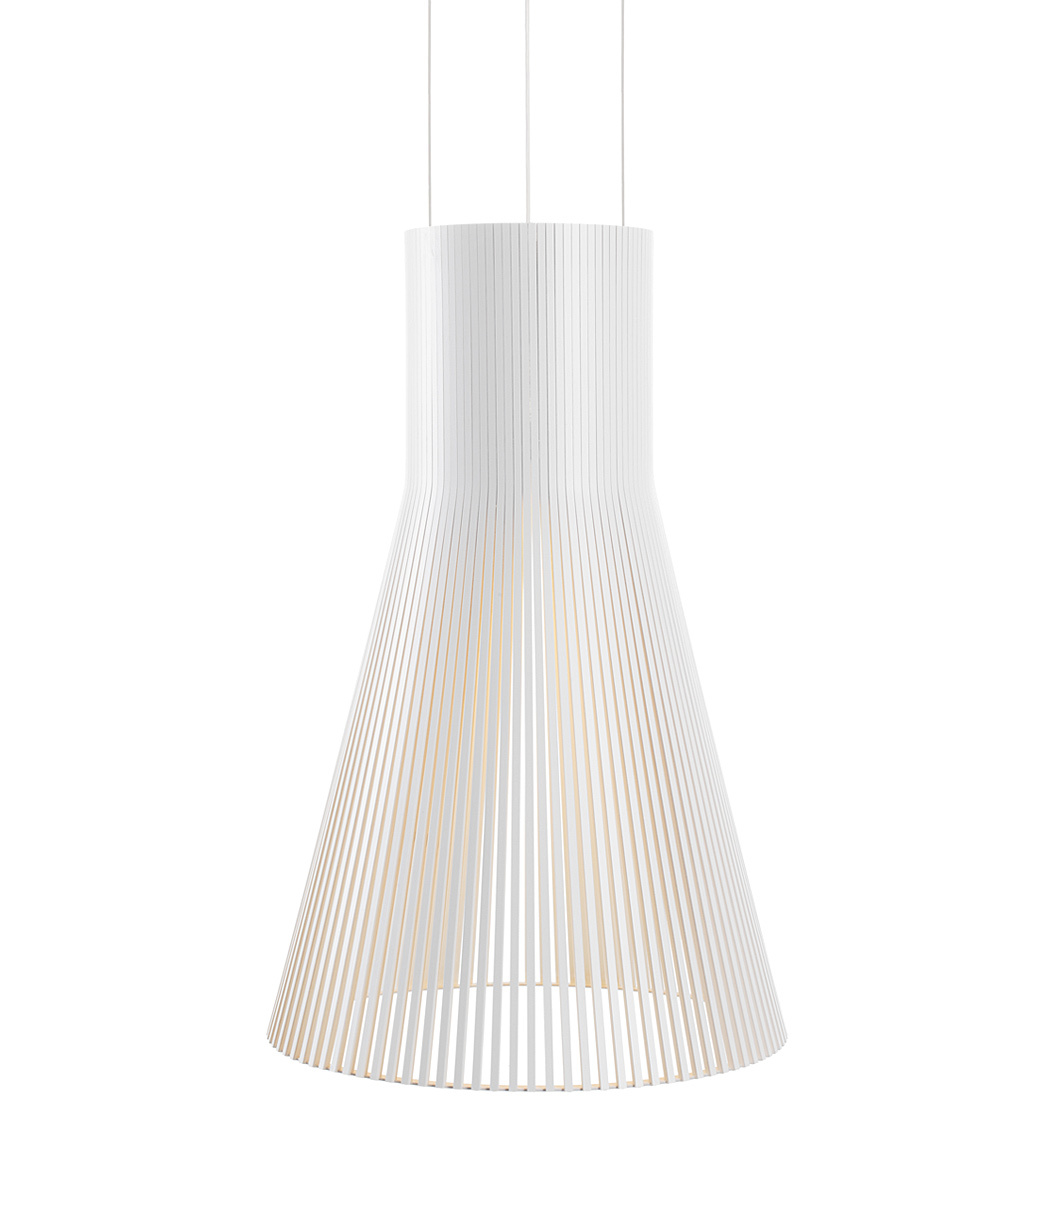 Magnum 4202 pendant lamp is available in white laminated